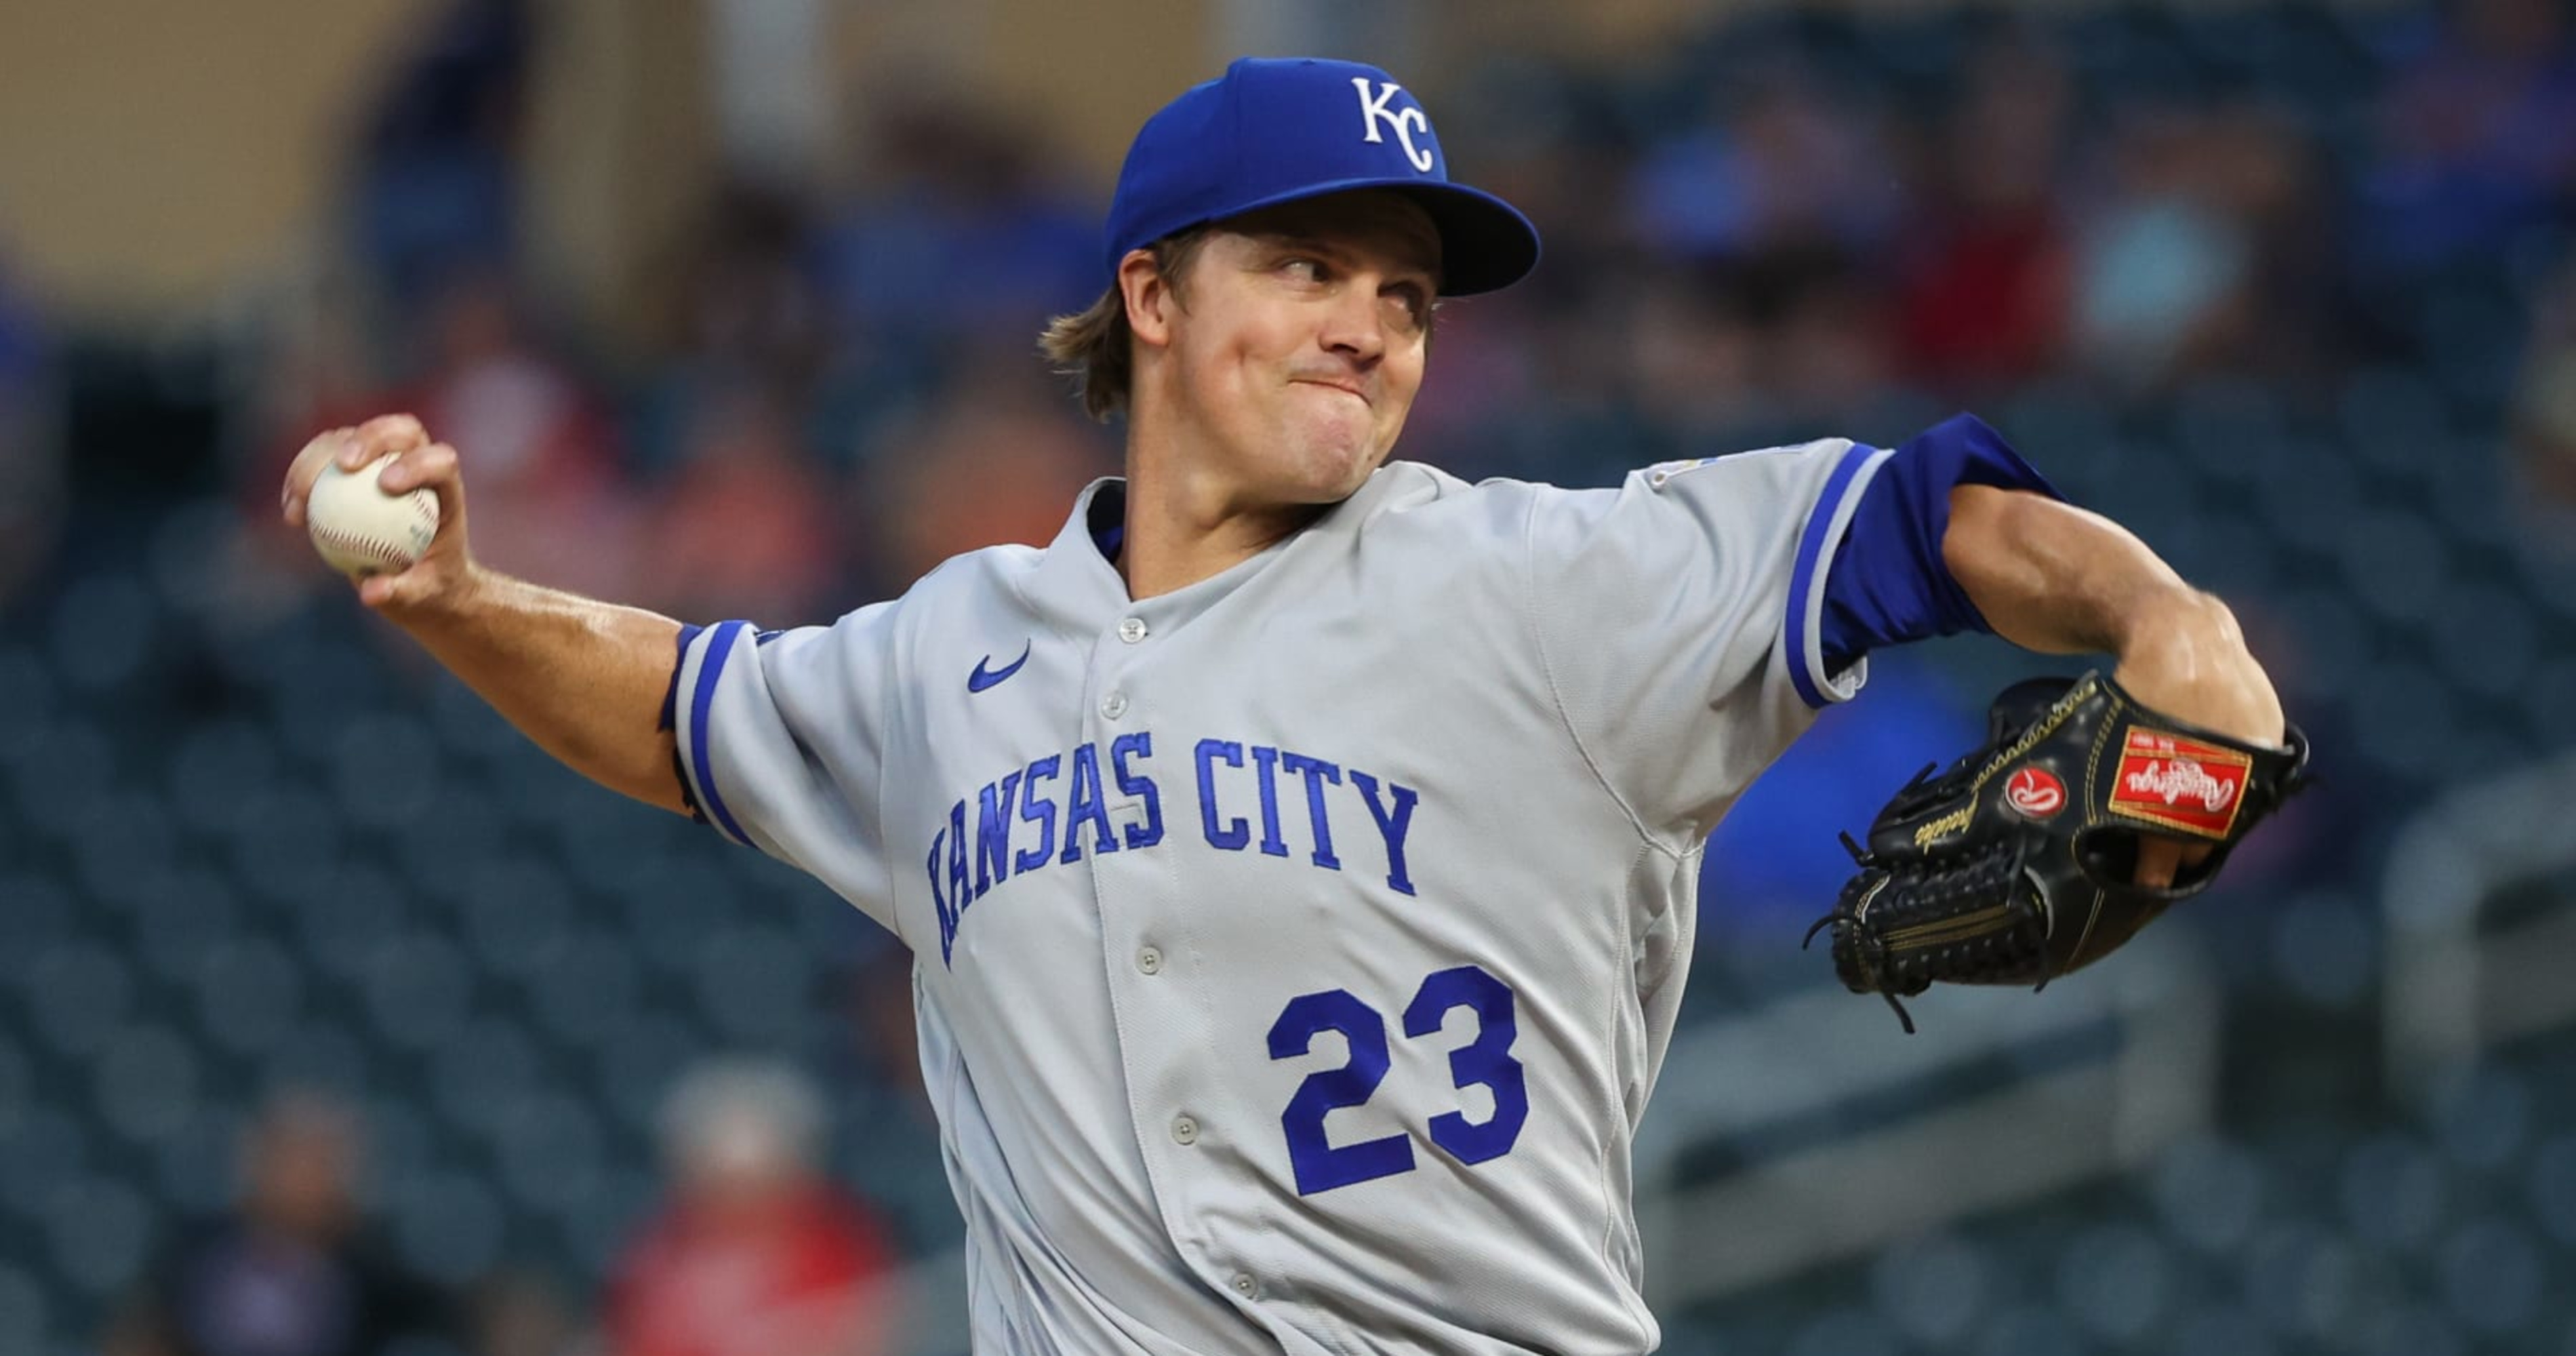 ⚾ Greinke pitches Royals to win over Yankees in what could be his